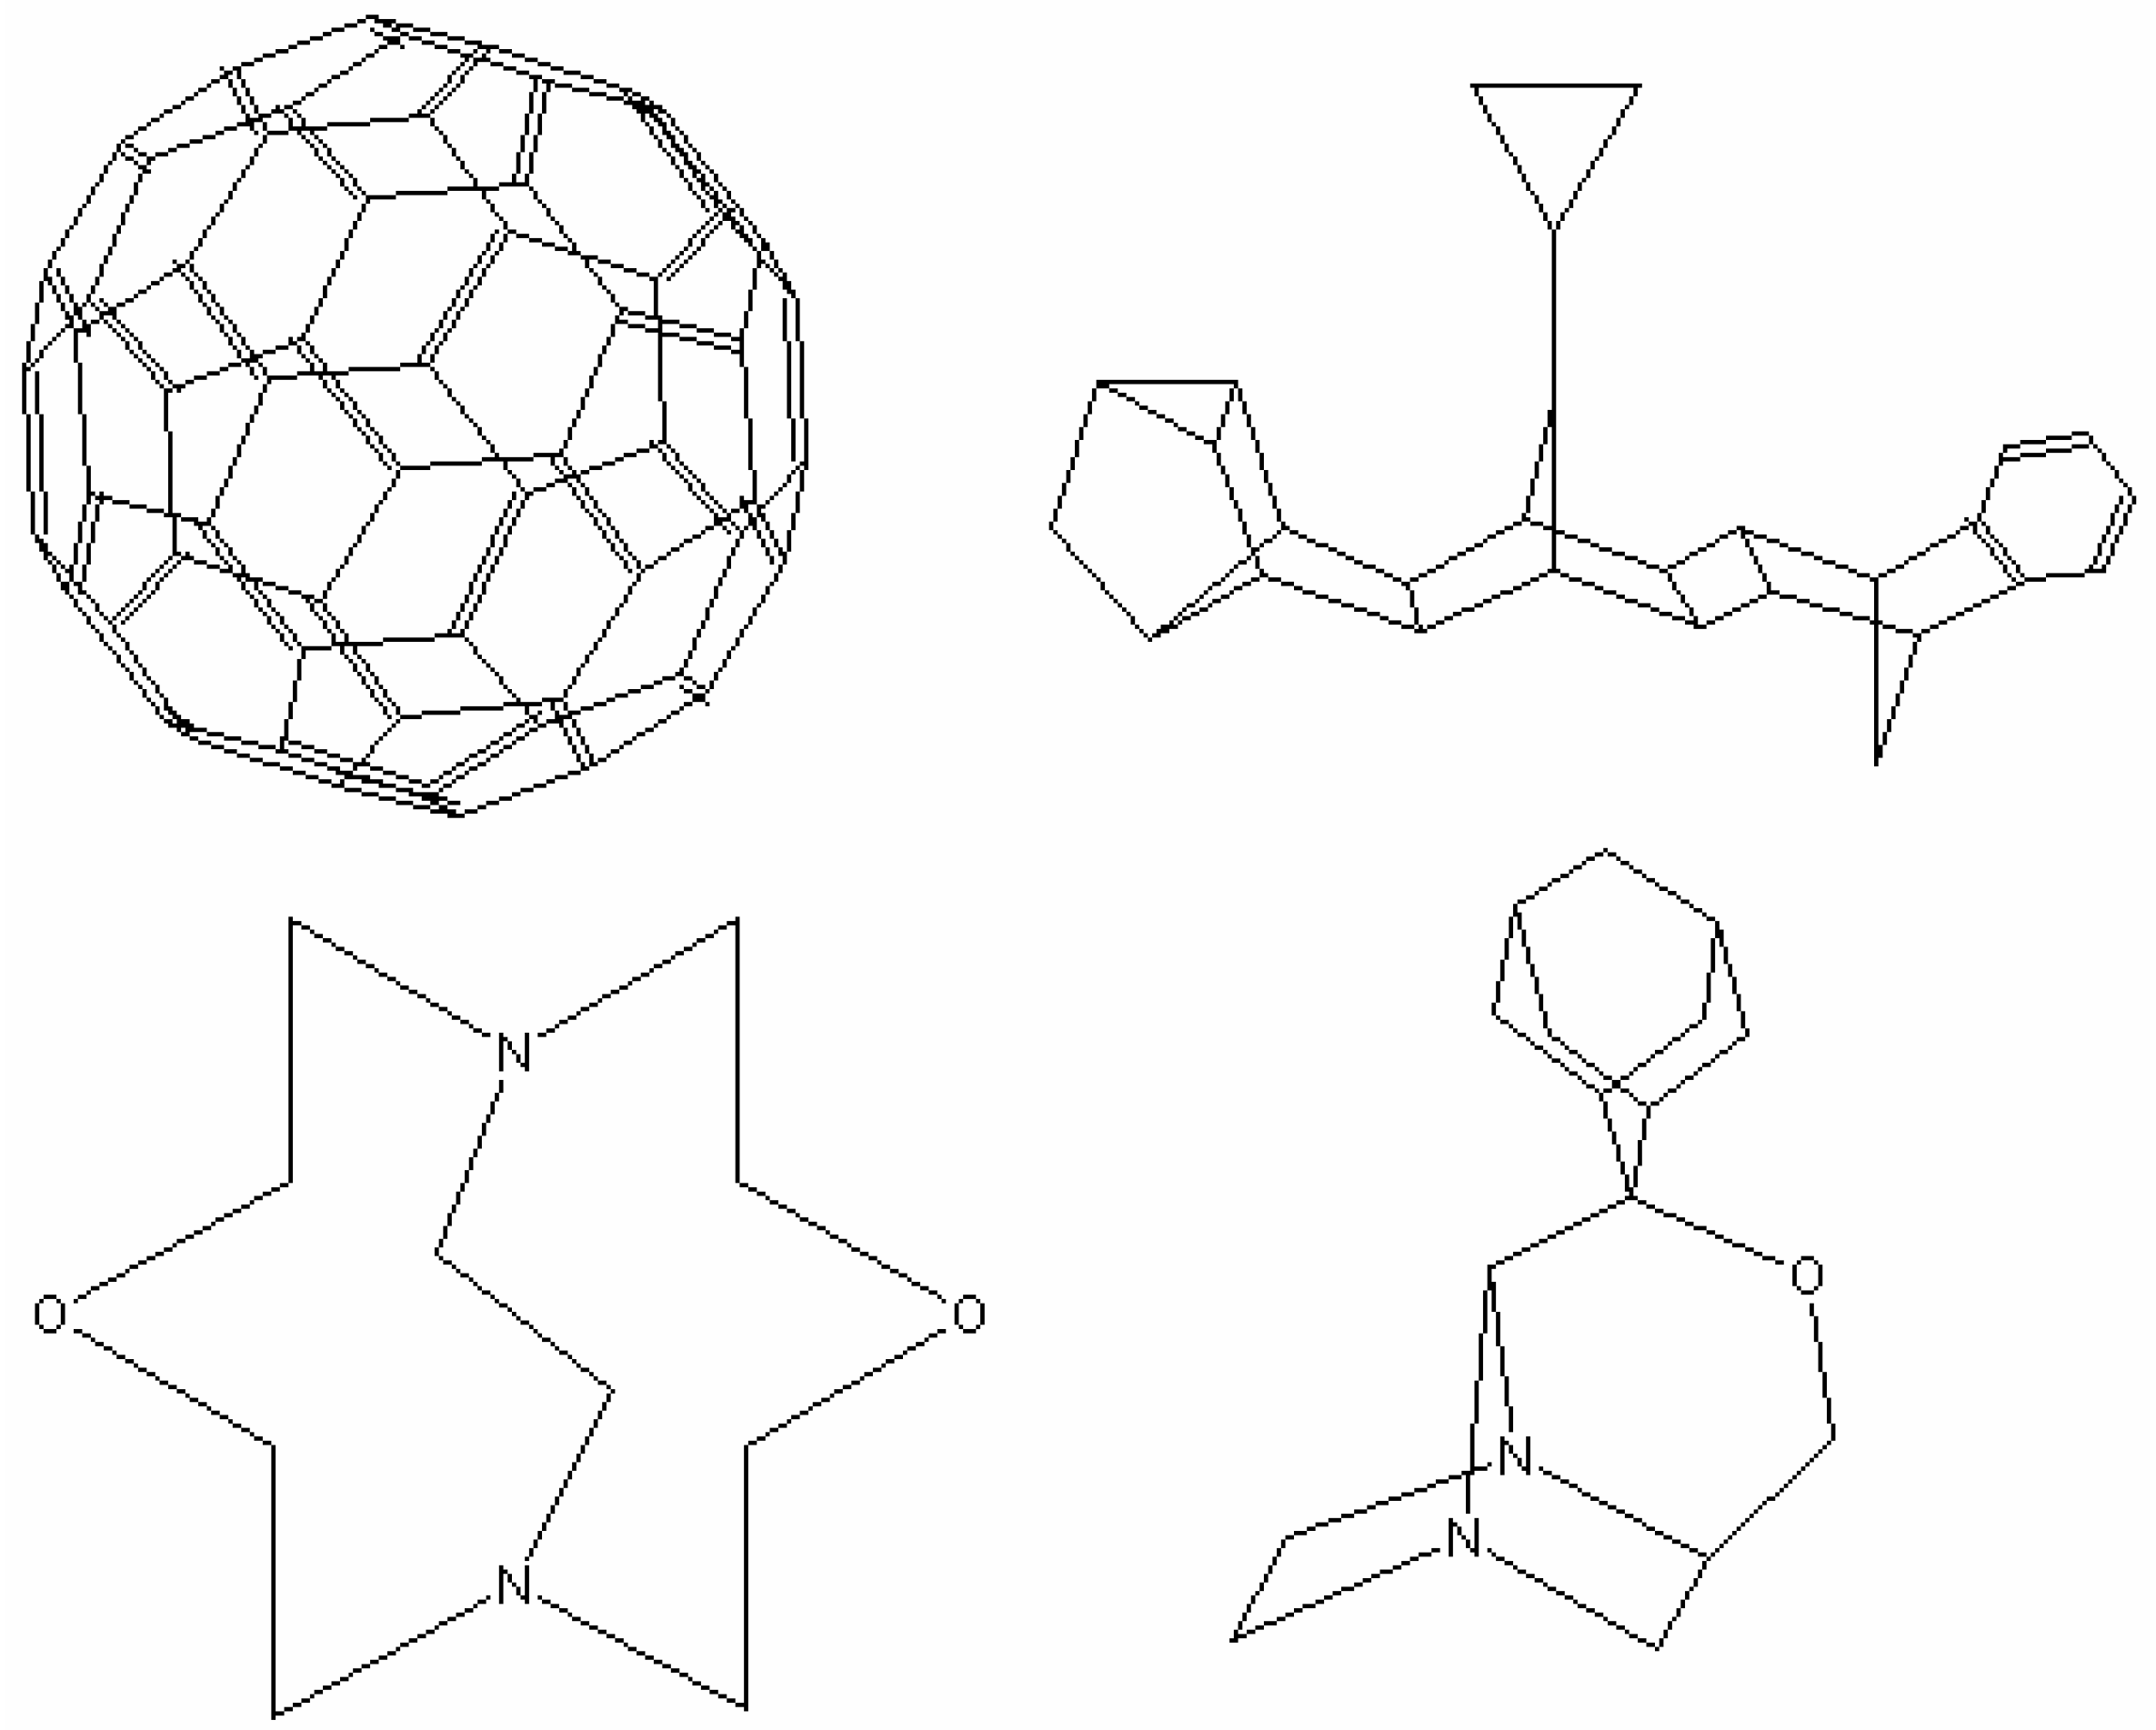 Chemical Structure Drawing Realistic